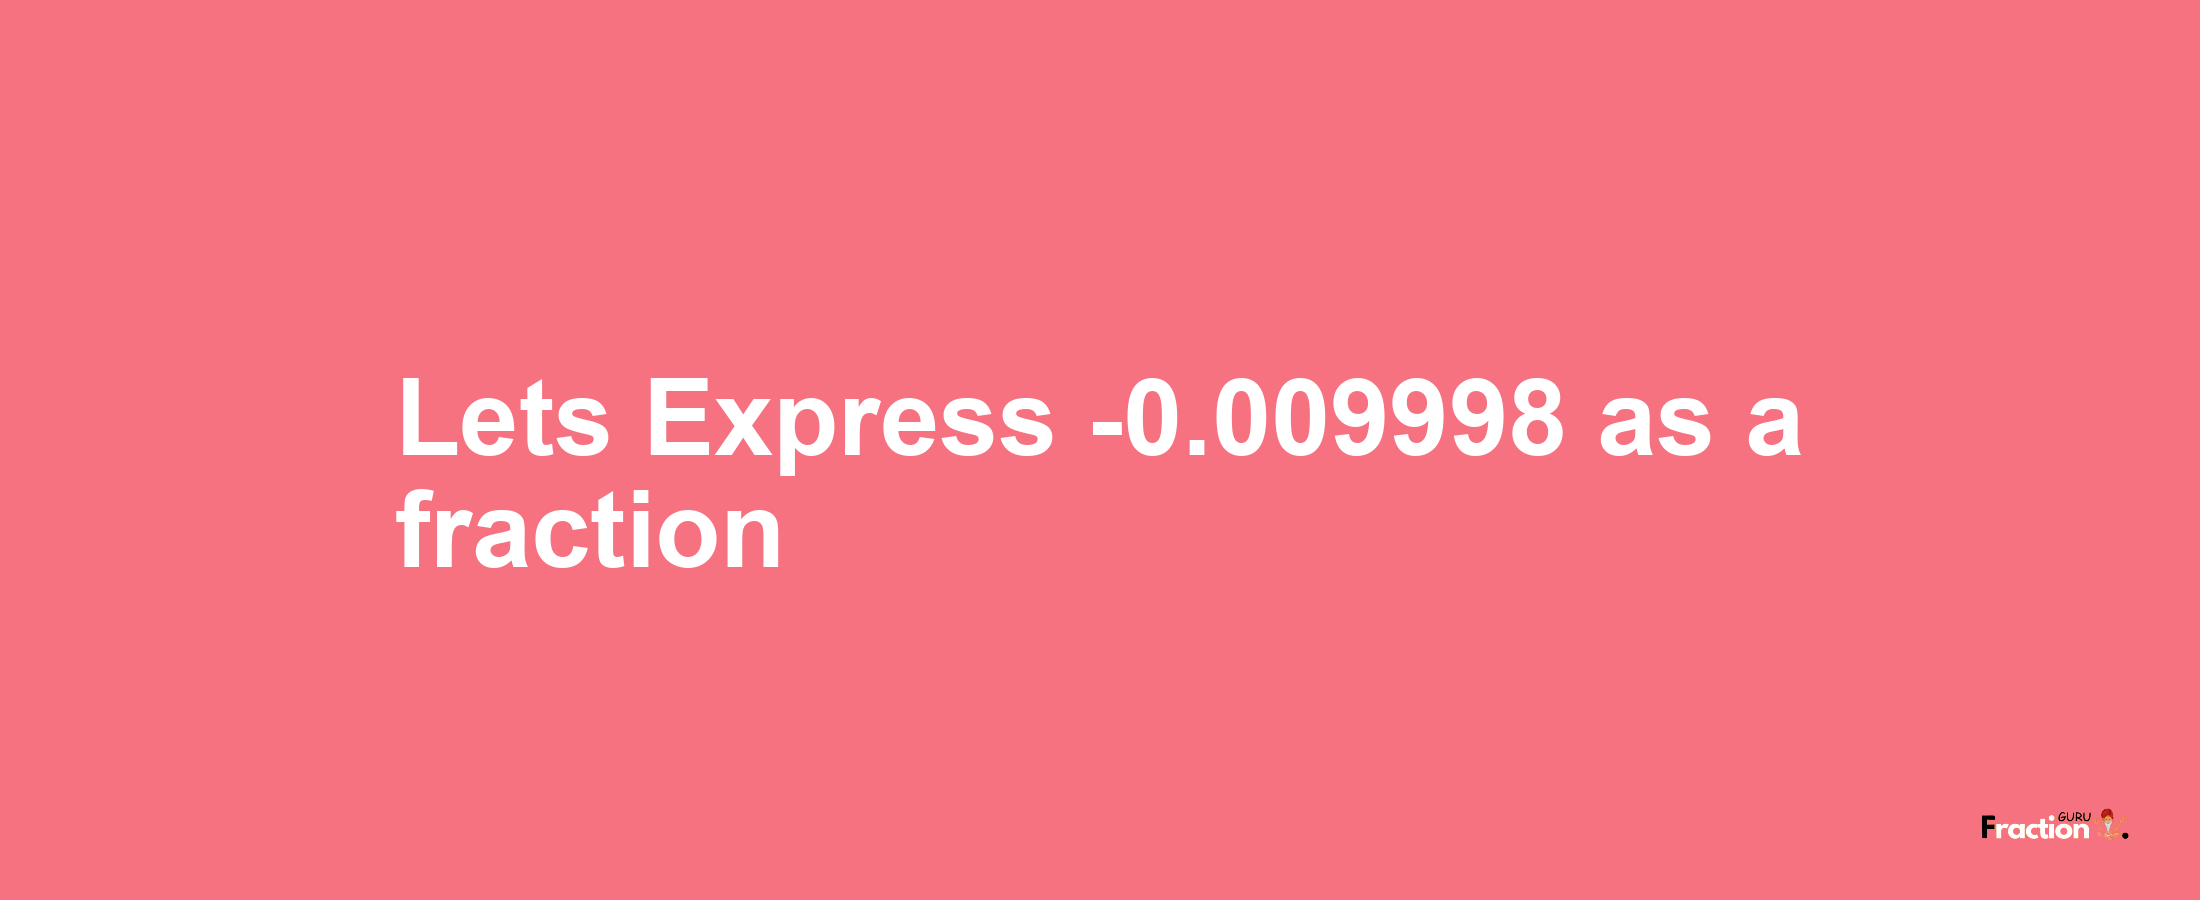 Lets Express -0.009998 as afraction